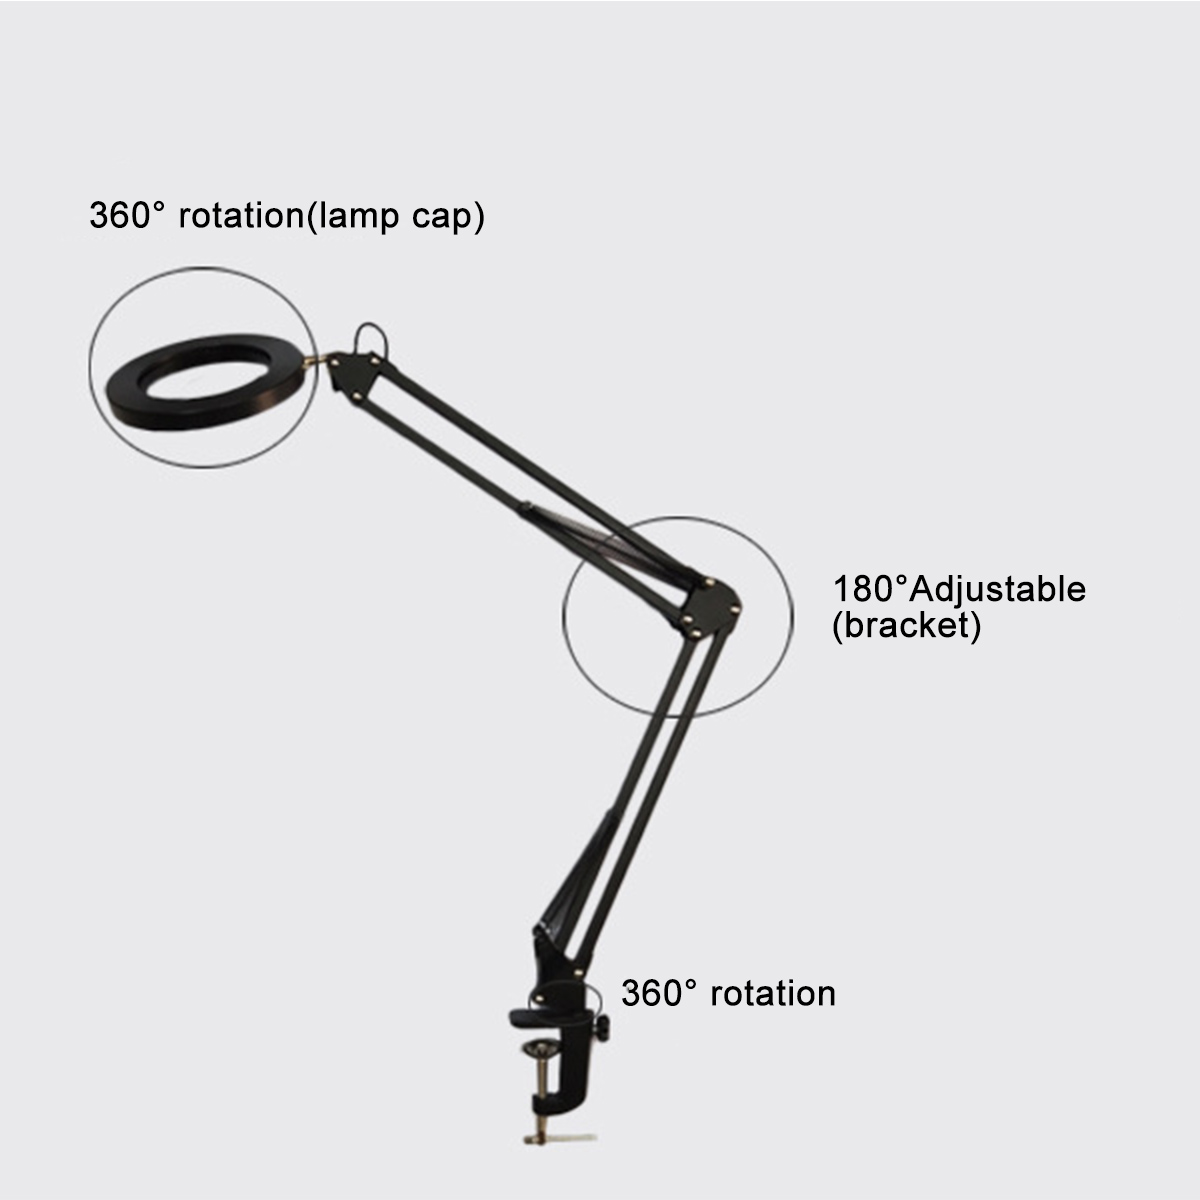 5X-Magnifying-Lamp-Clamp-Mount-LED-Magnifier-Lamp-Manicure-Tattoo-Beauty-Light-1801341-9